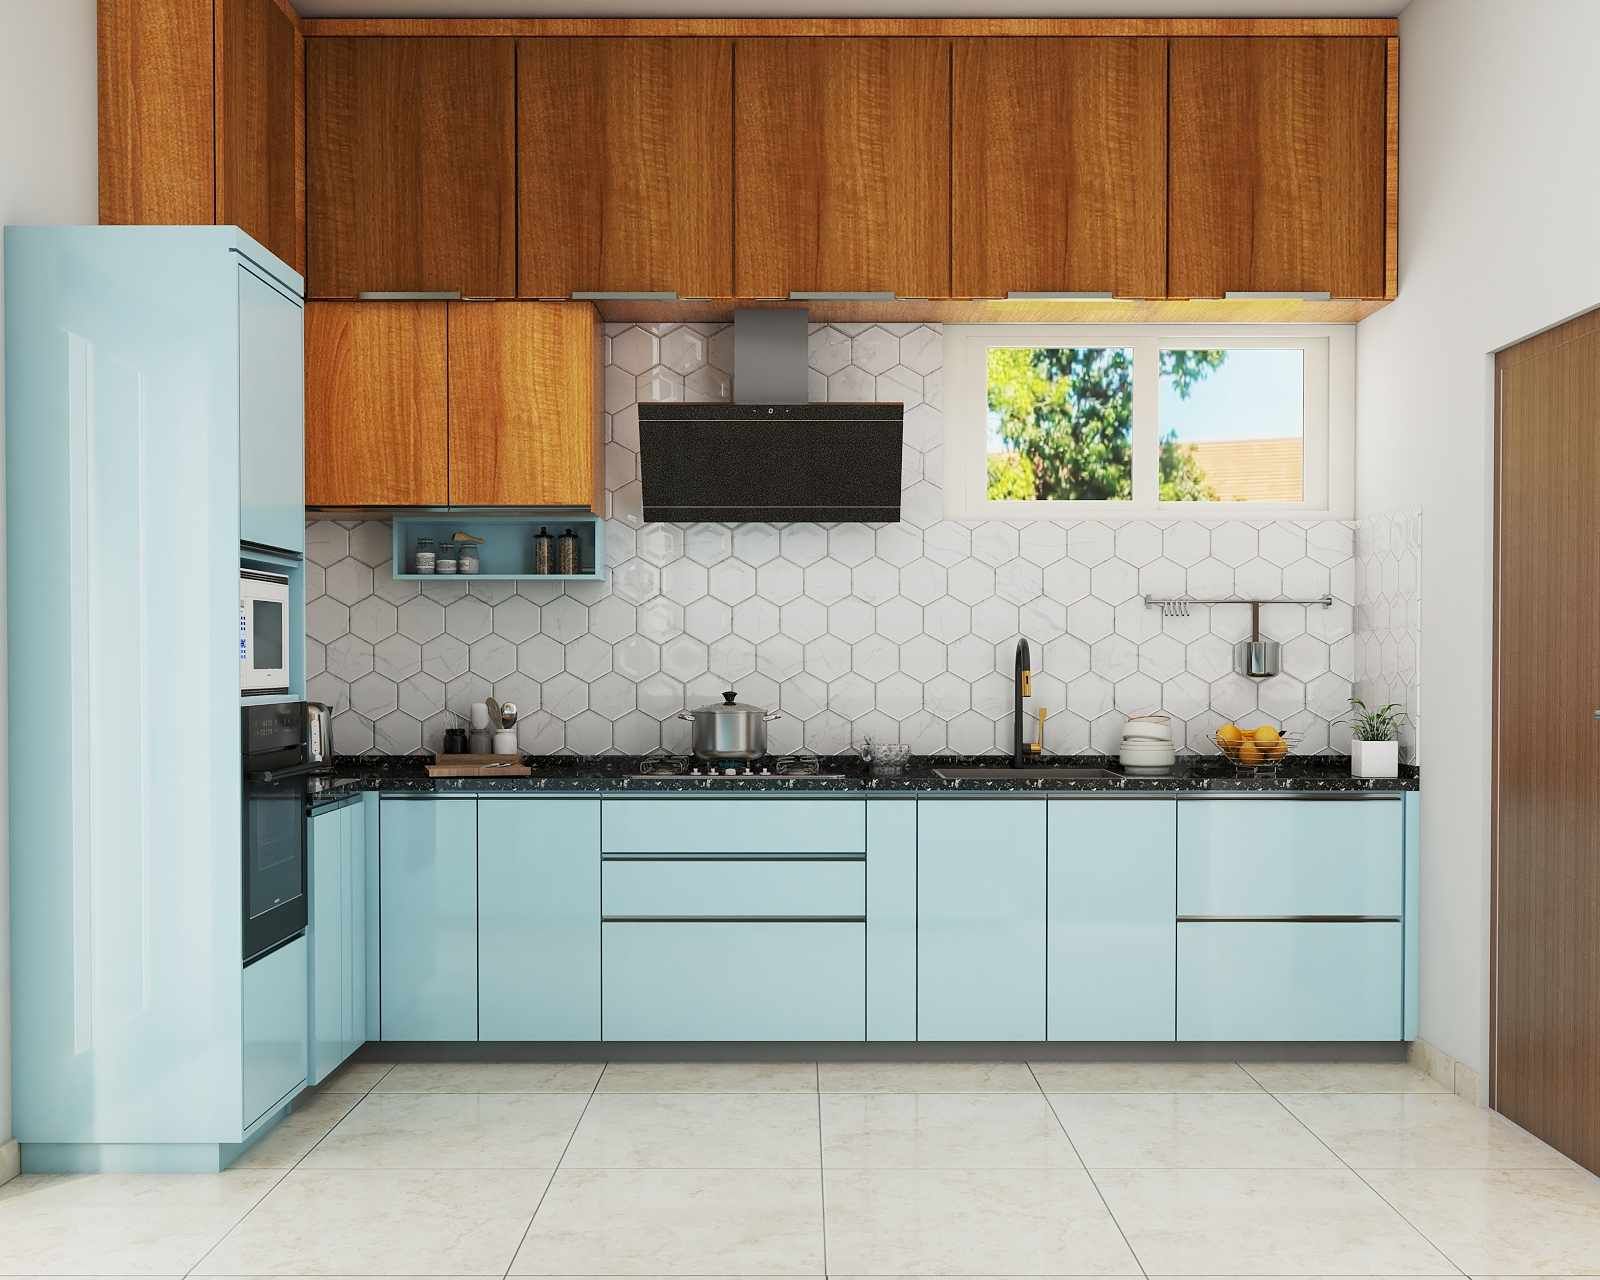 Modern Style Modular L-Shaped Kitchen Design In Blue And Wood